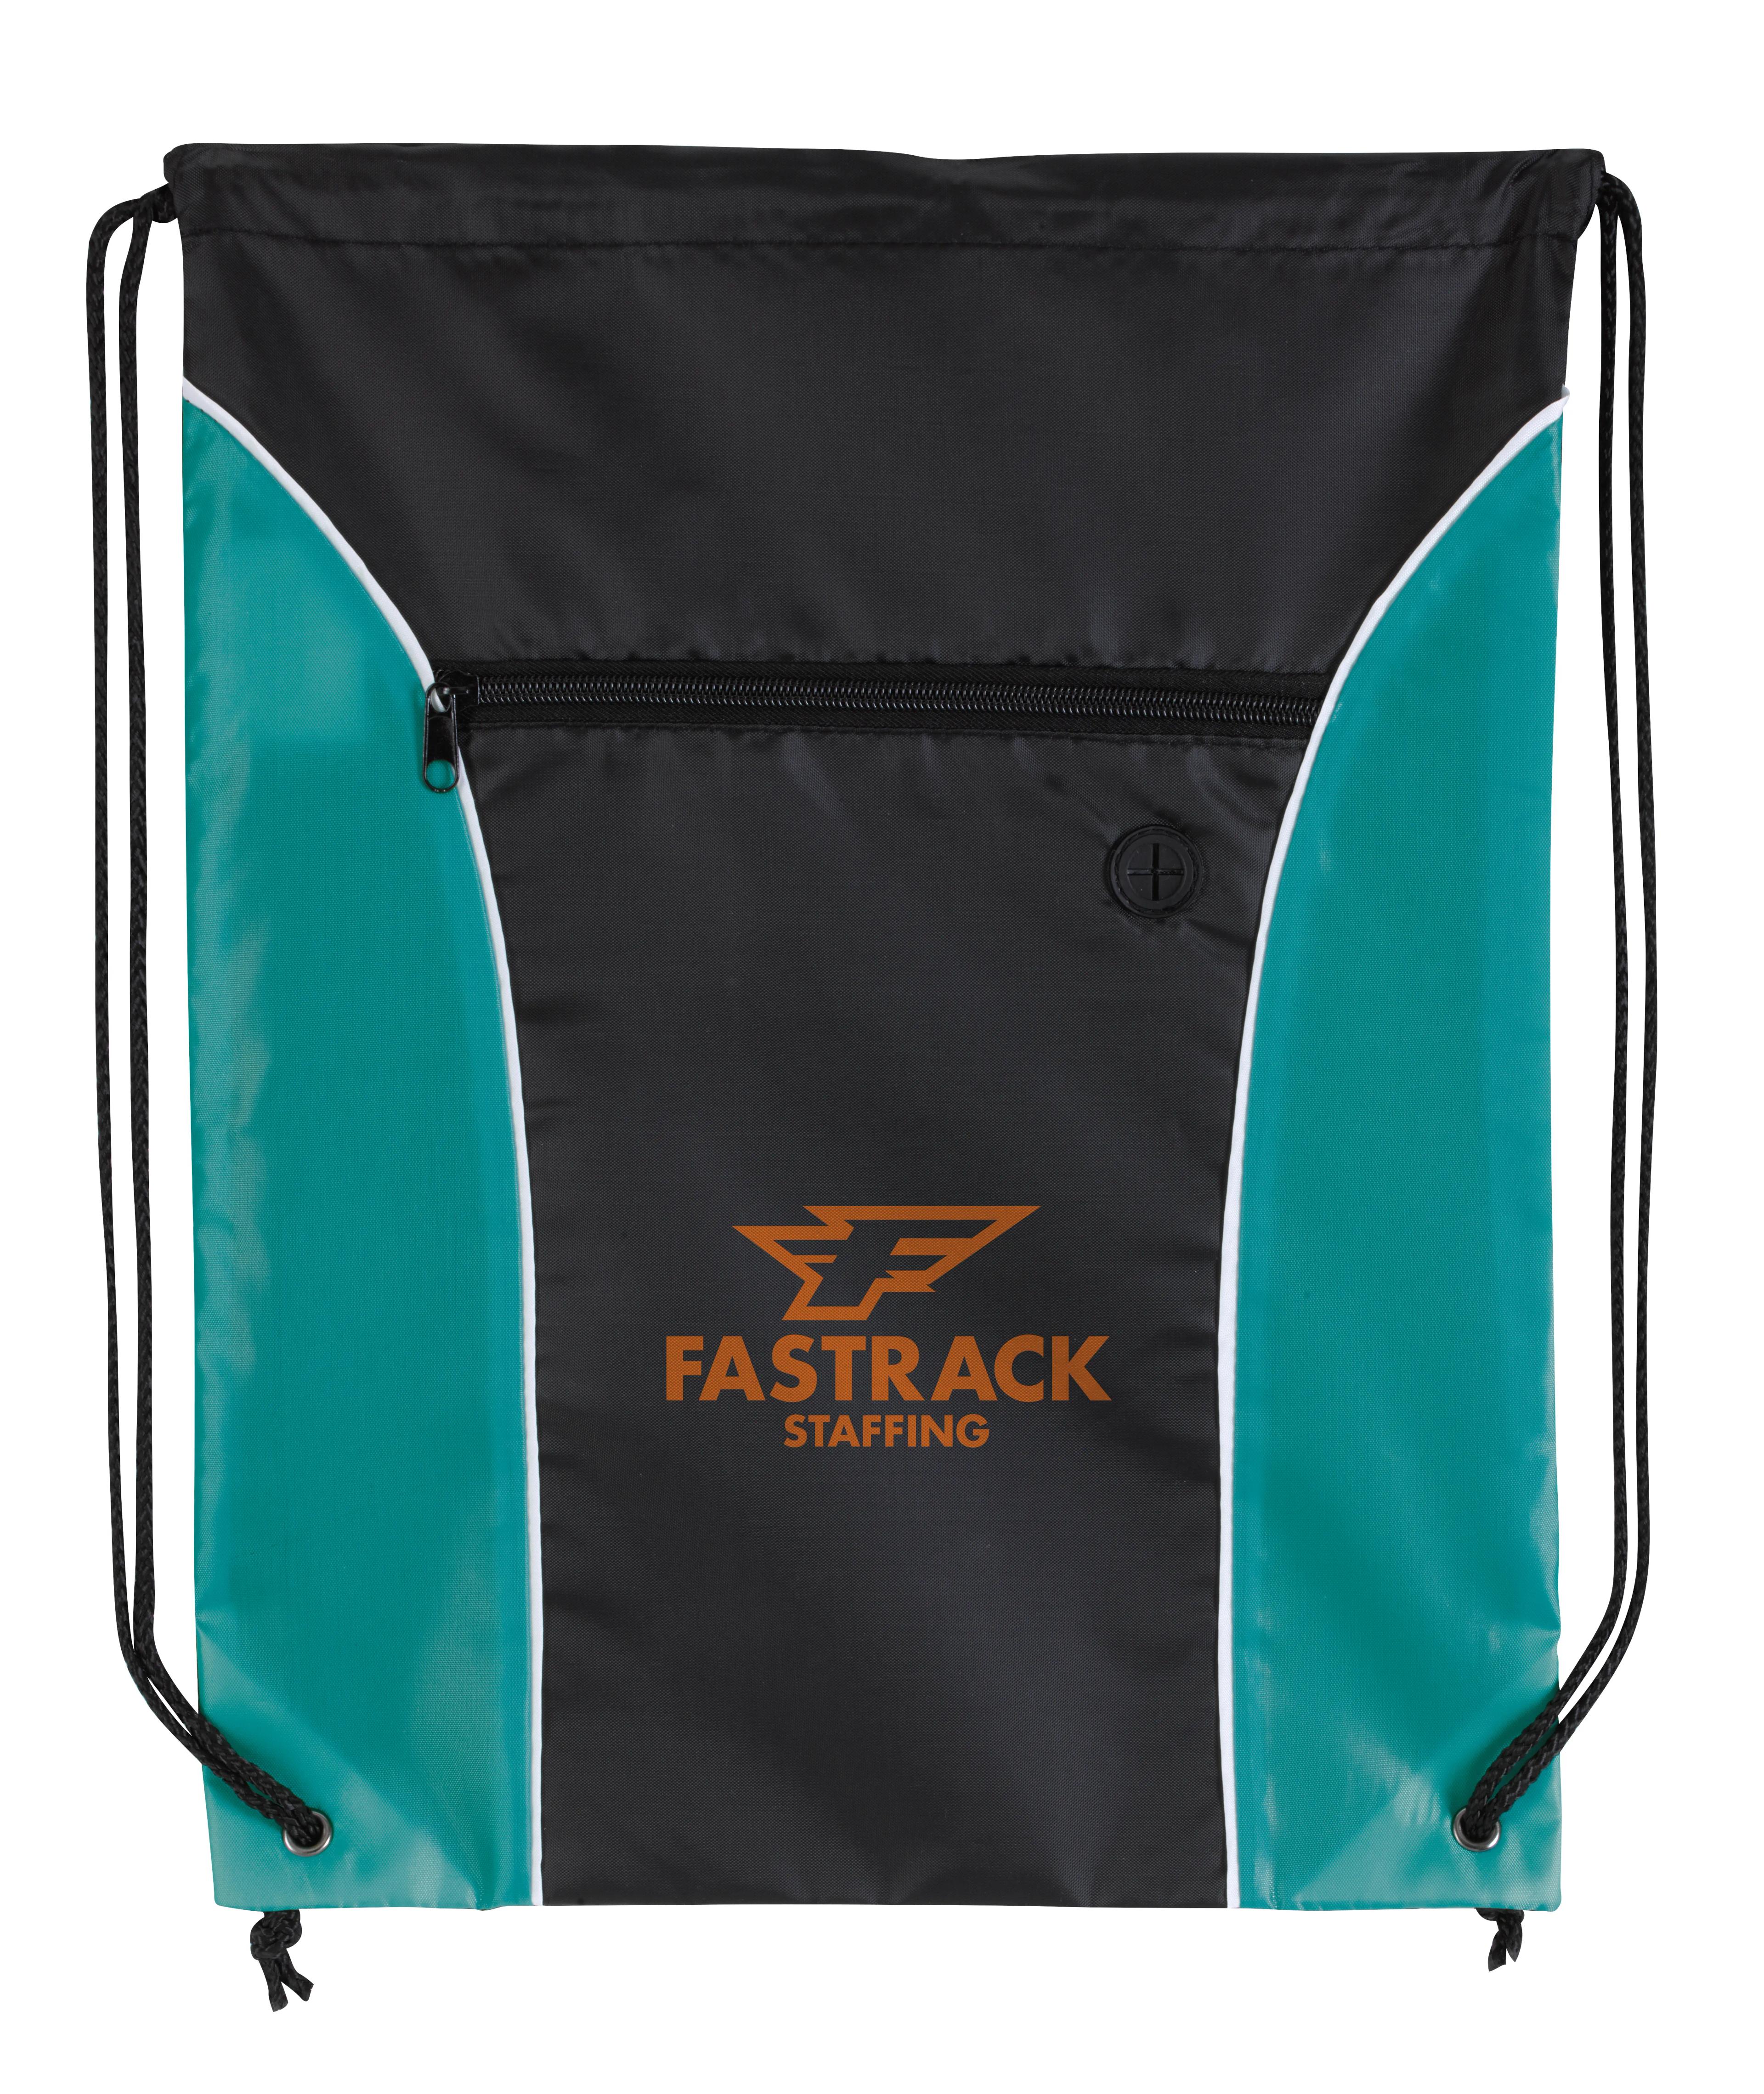 Midpoint Drawstring Backpack 15 of 16